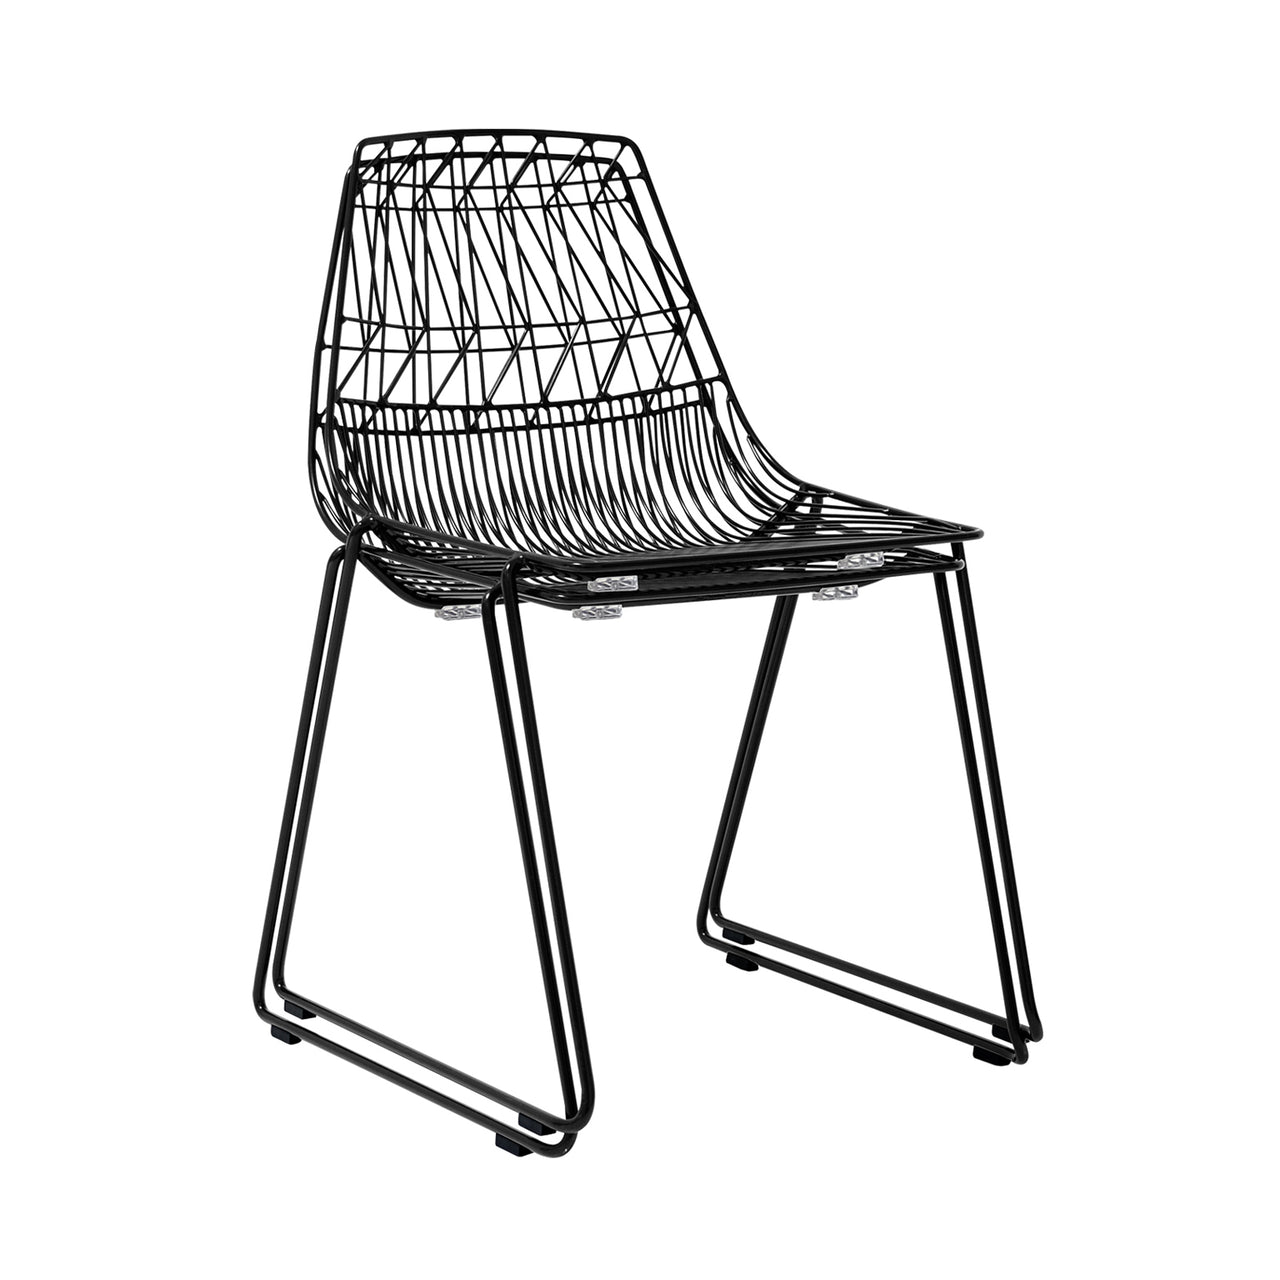 Lucy Stacking Chair: Color + Black + Without Seat Pad